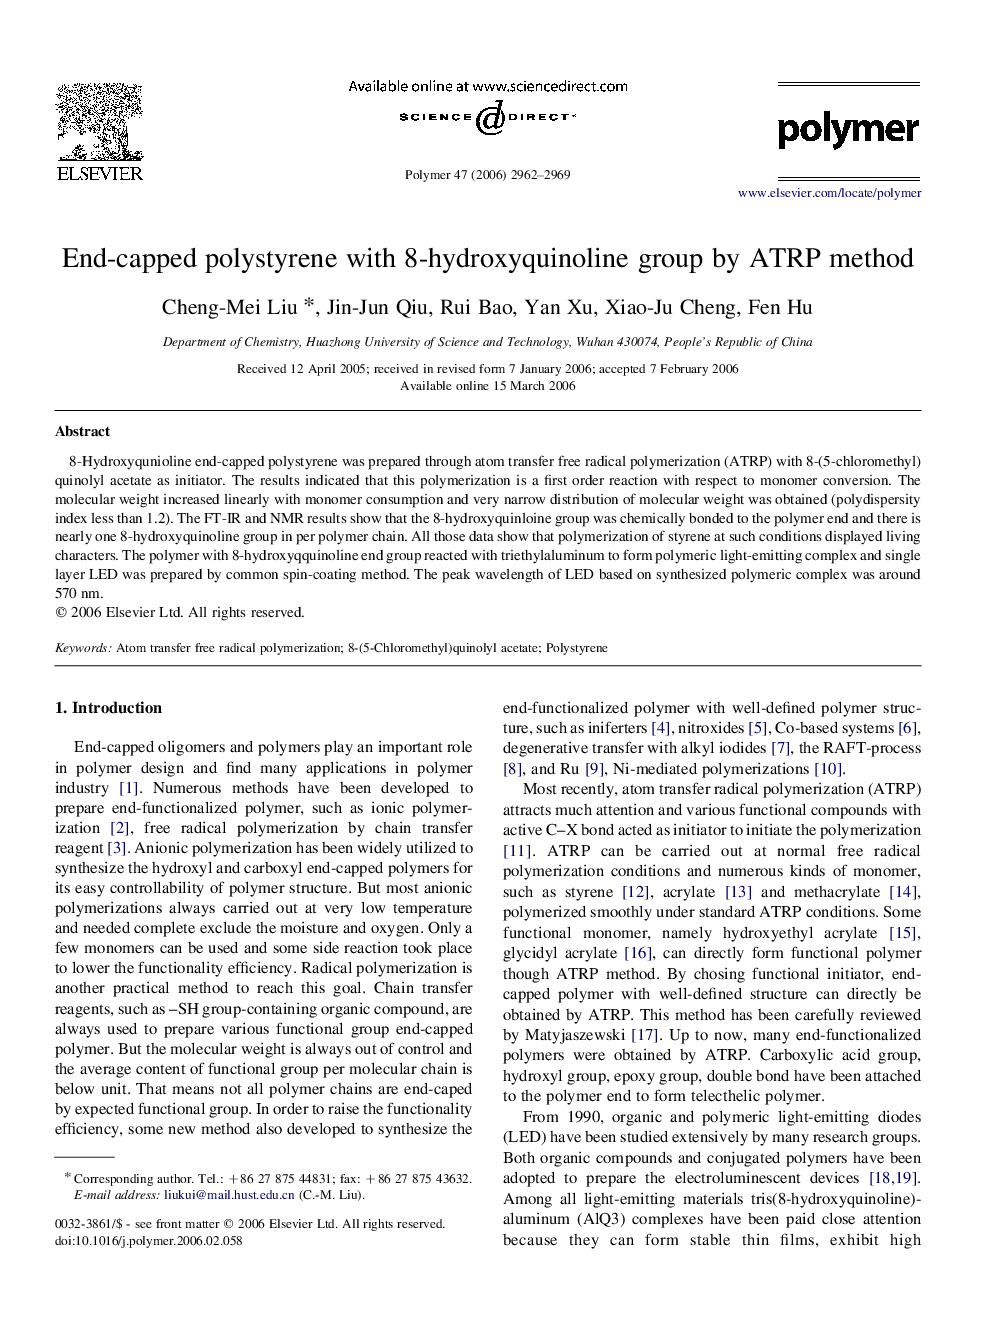 End-capped polystyrene with 8-hydroxyquinoline group by ATRP method